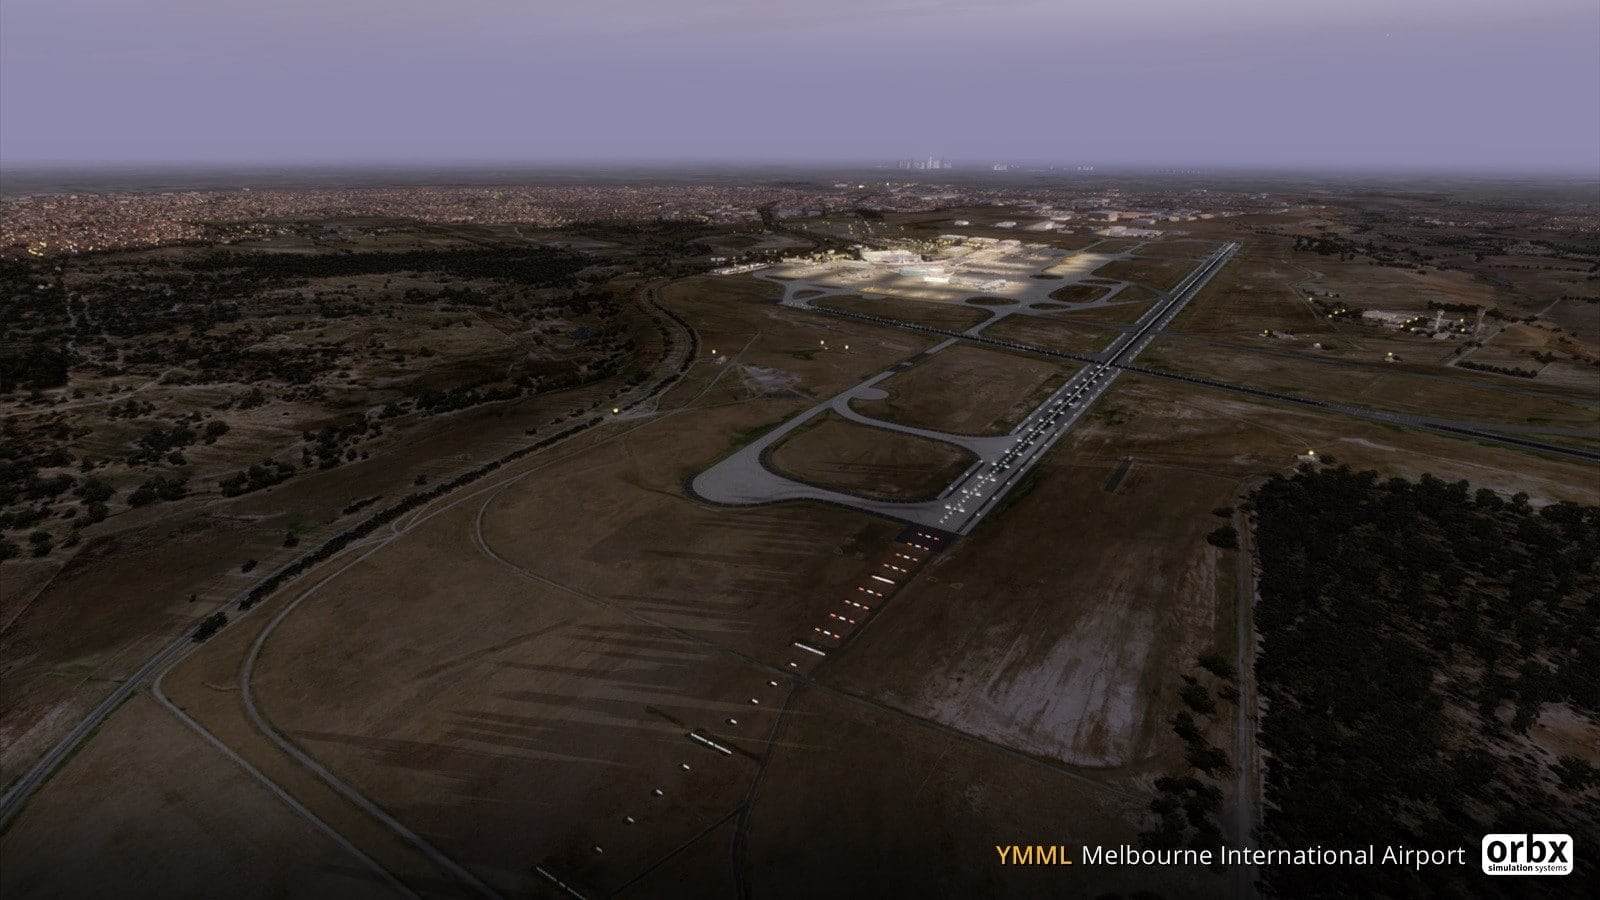 Melbourne Airport by Orbx for P3D as an example of what to expect.